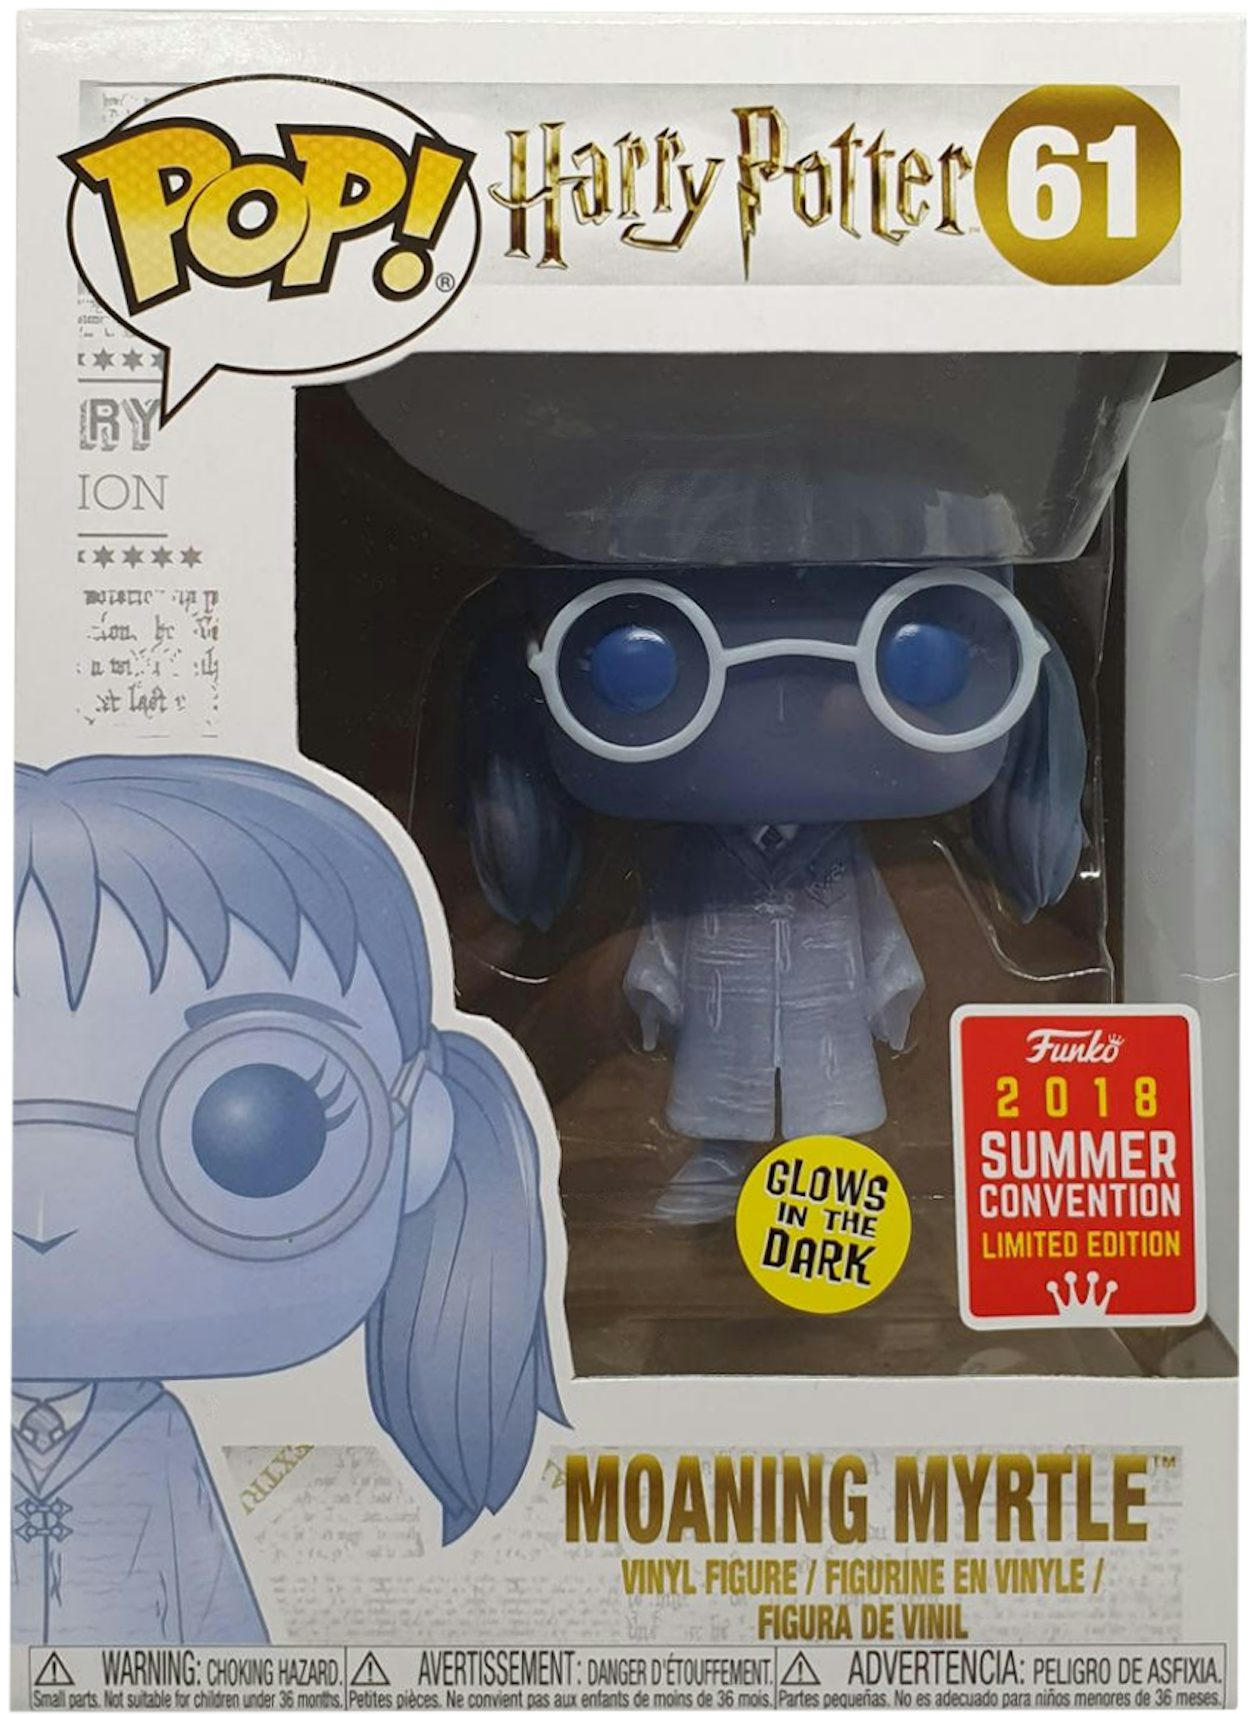 https://images.stockx.com/images/Funko-Pop-Movies-Harry-Potter-Moaning-Myrtle-Glow-Summer-Convention-Exclusive-Figure-61.jpg?fit=fill&bg=FFFFFF&w=1200&h=857&fm=jpg&auto=compress&dpr=2&trim=color&updated_at=1620336526&q=60